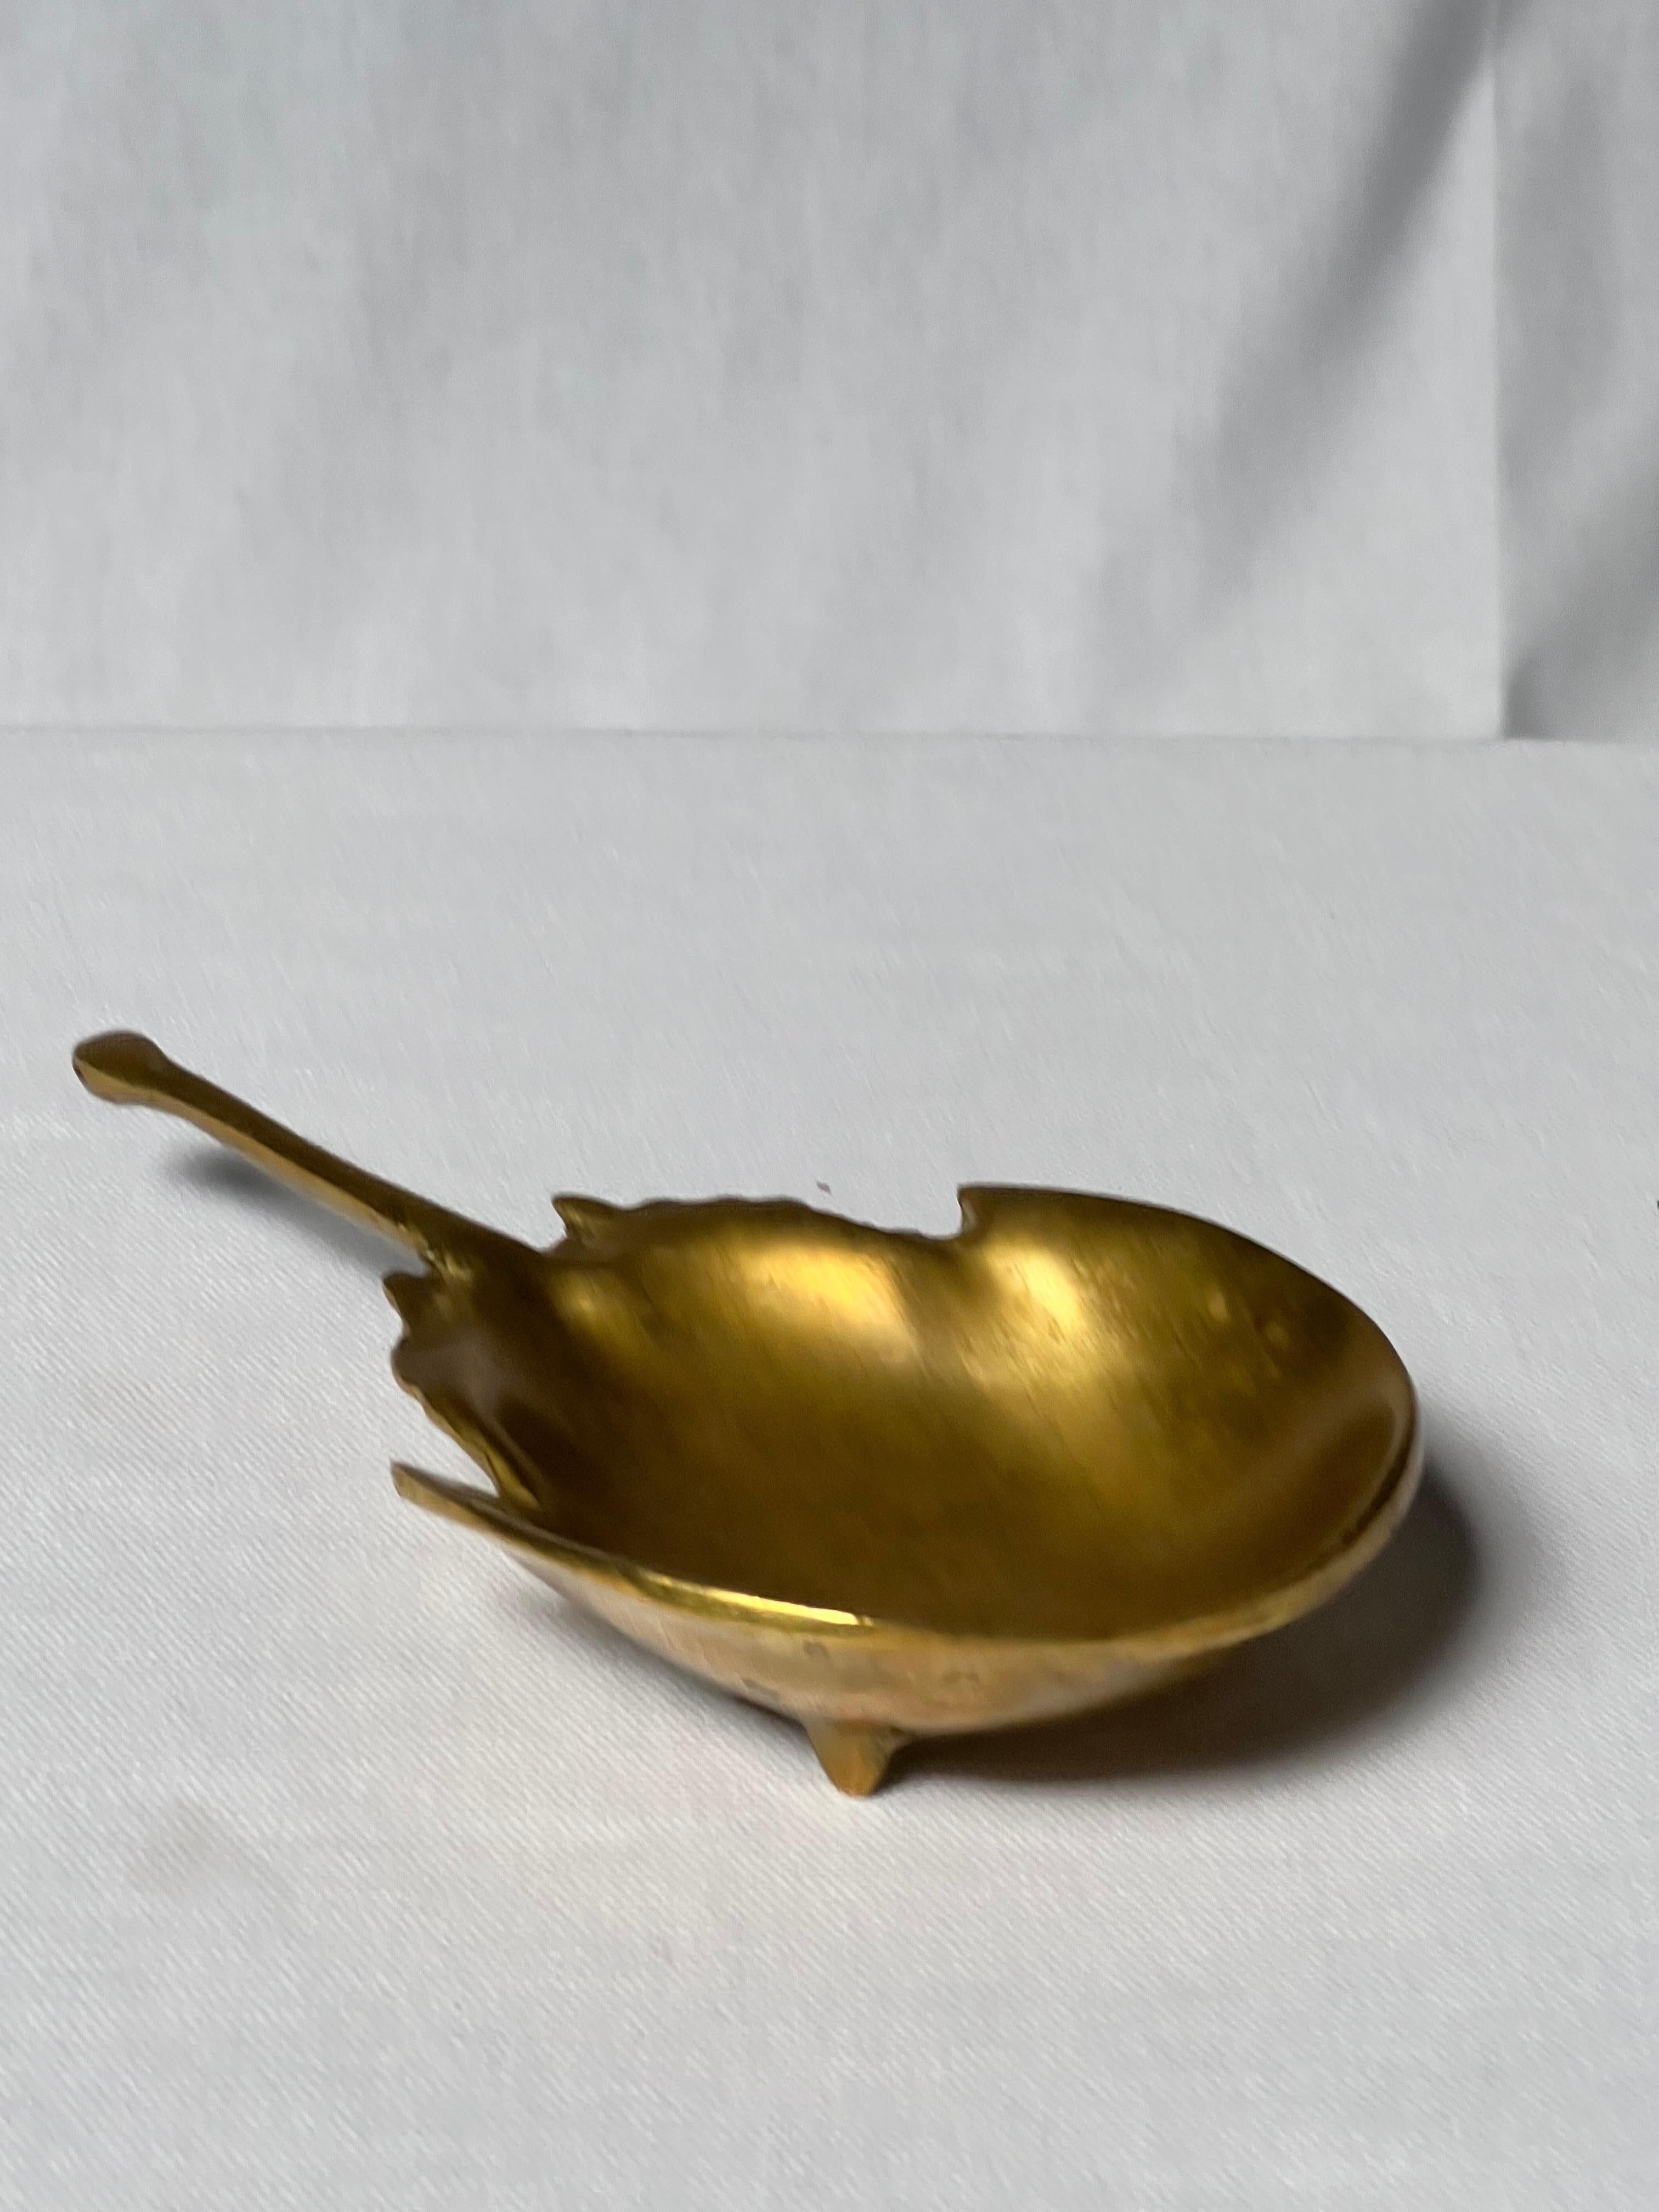 Unique and rare bronze ashtray in the shape of a sea ray. Massive bronze, with organic shape. Slick as a nice stone. Perfect as decorative object or for cigars and